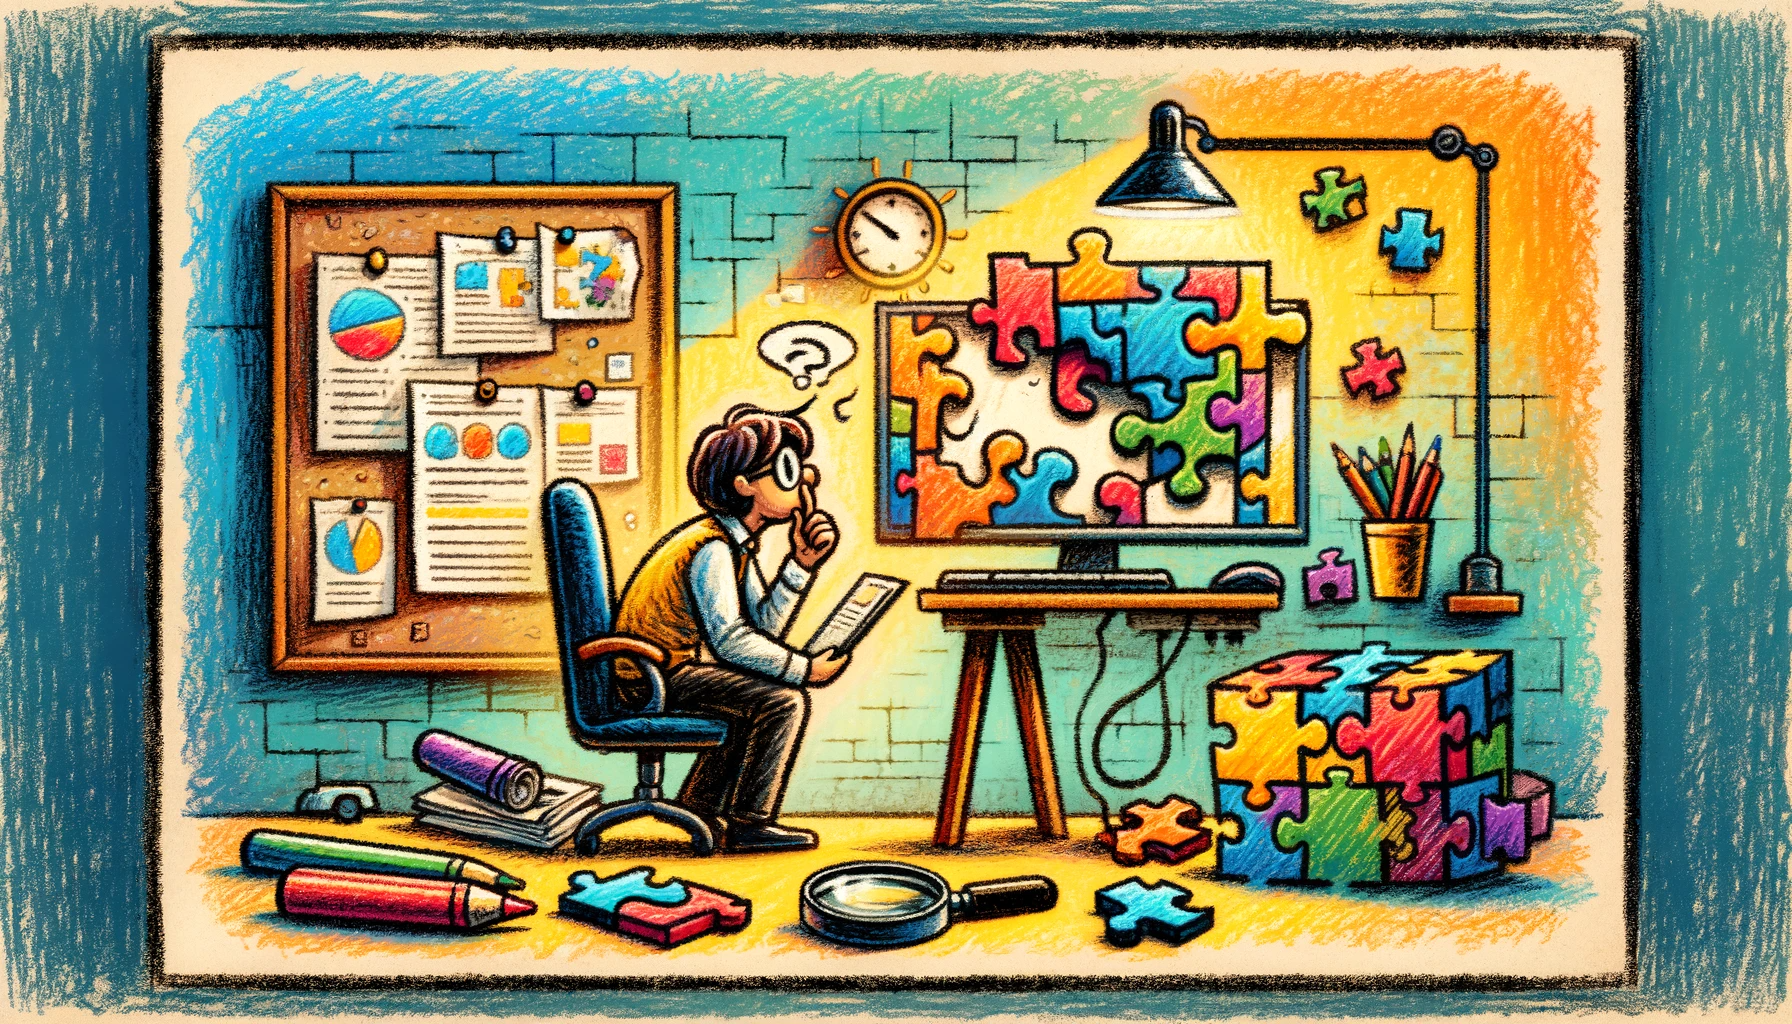 A whimsical, crayon-style drawing for a blog header that metaphorically depicts the troubleshooting of a problematic blogging software plugin. The image feature a colorful and playful scene with a person sitting at a computer desk, looking puzzled over a jigsaw puzzle that represents the plugin, with pieces scattered and one not fitting correctly. Include a magnifying glass nearby to symbolize the search for a solution. In the background, show a bulletin board with notes and diagrams that hint at problem-solving but without any legible text. The crayon texture should be evident, giving the scene a child-like innocence, contrasting with the technical nature of the blog content. Use bright, primary colors to give the drawing a cheerful and less intimidating feel.